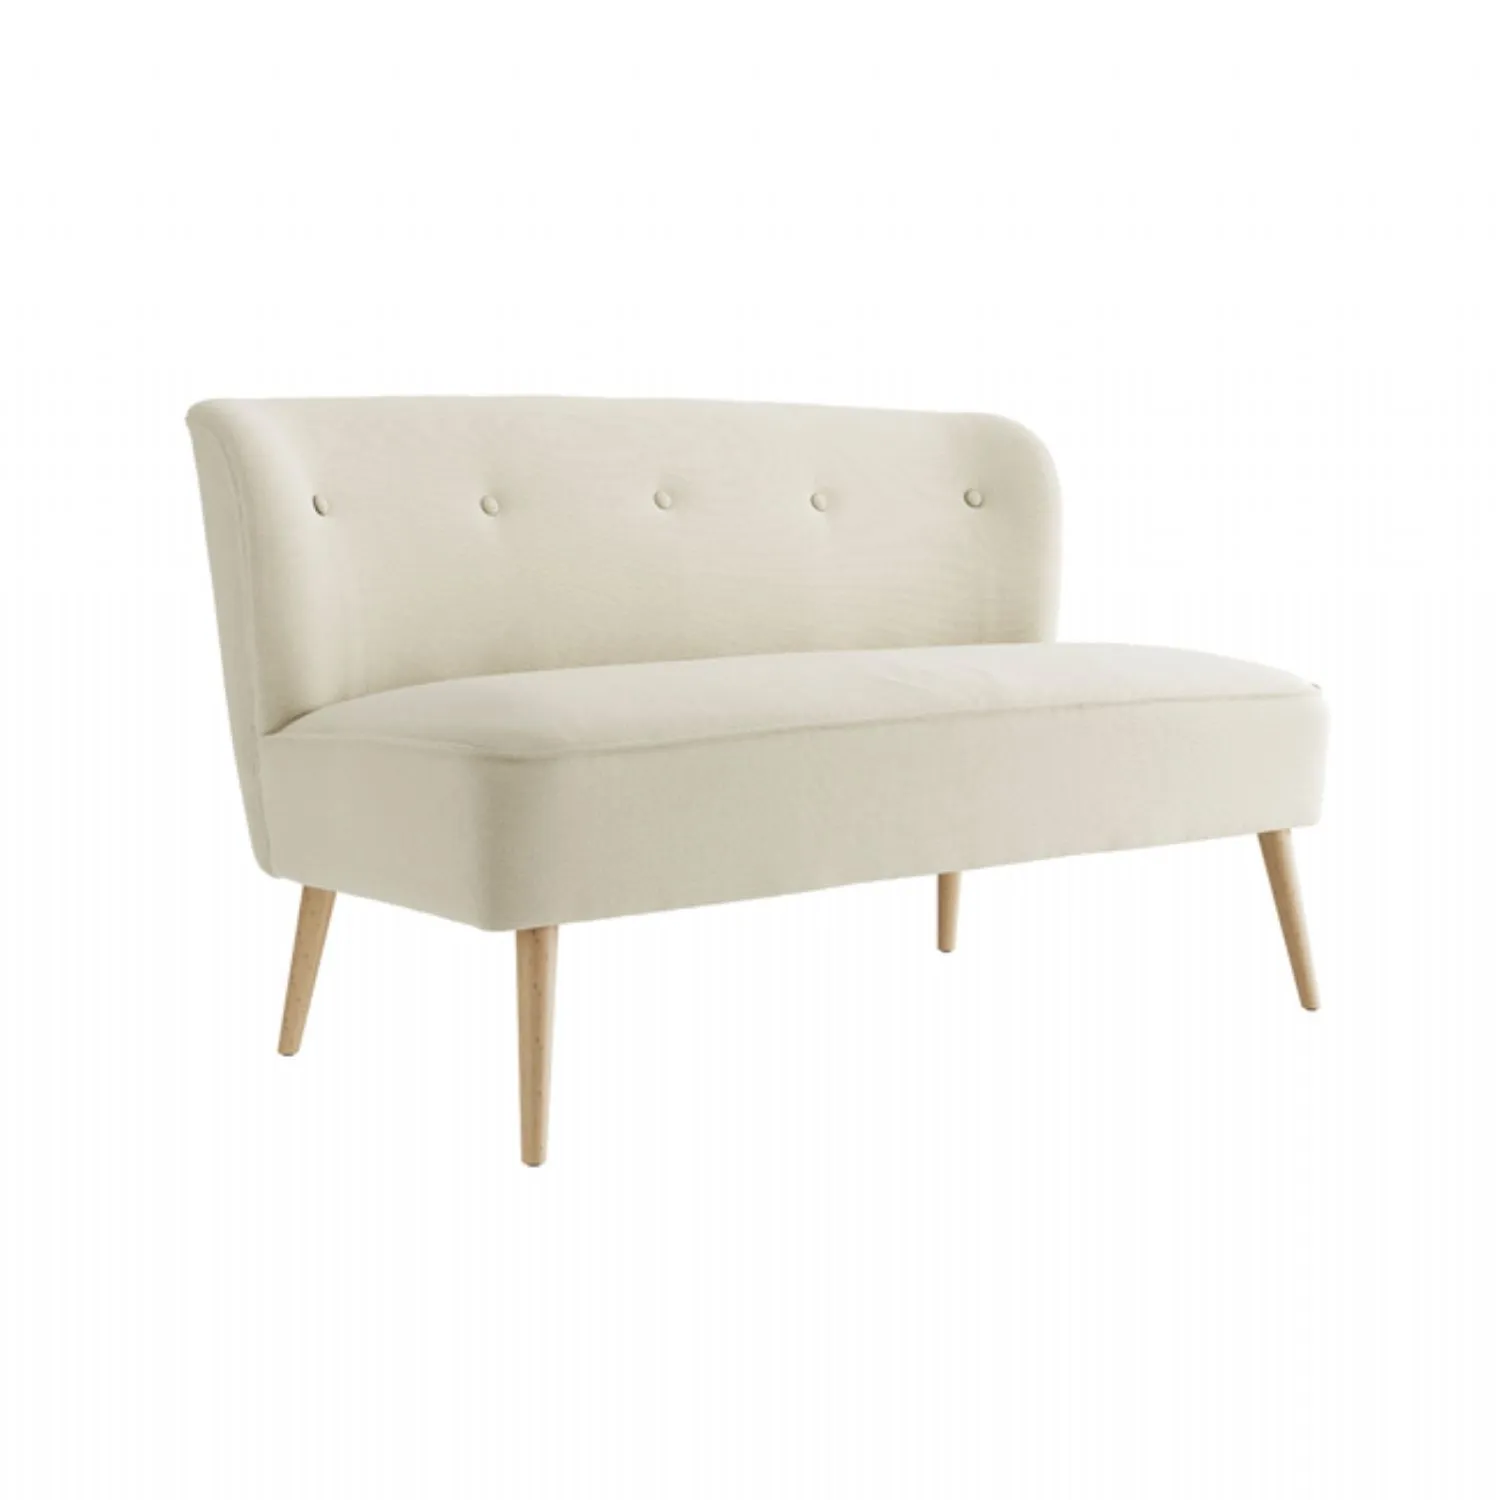 Cream Fabric 2 Seater Buttoned Back Sofa Bed